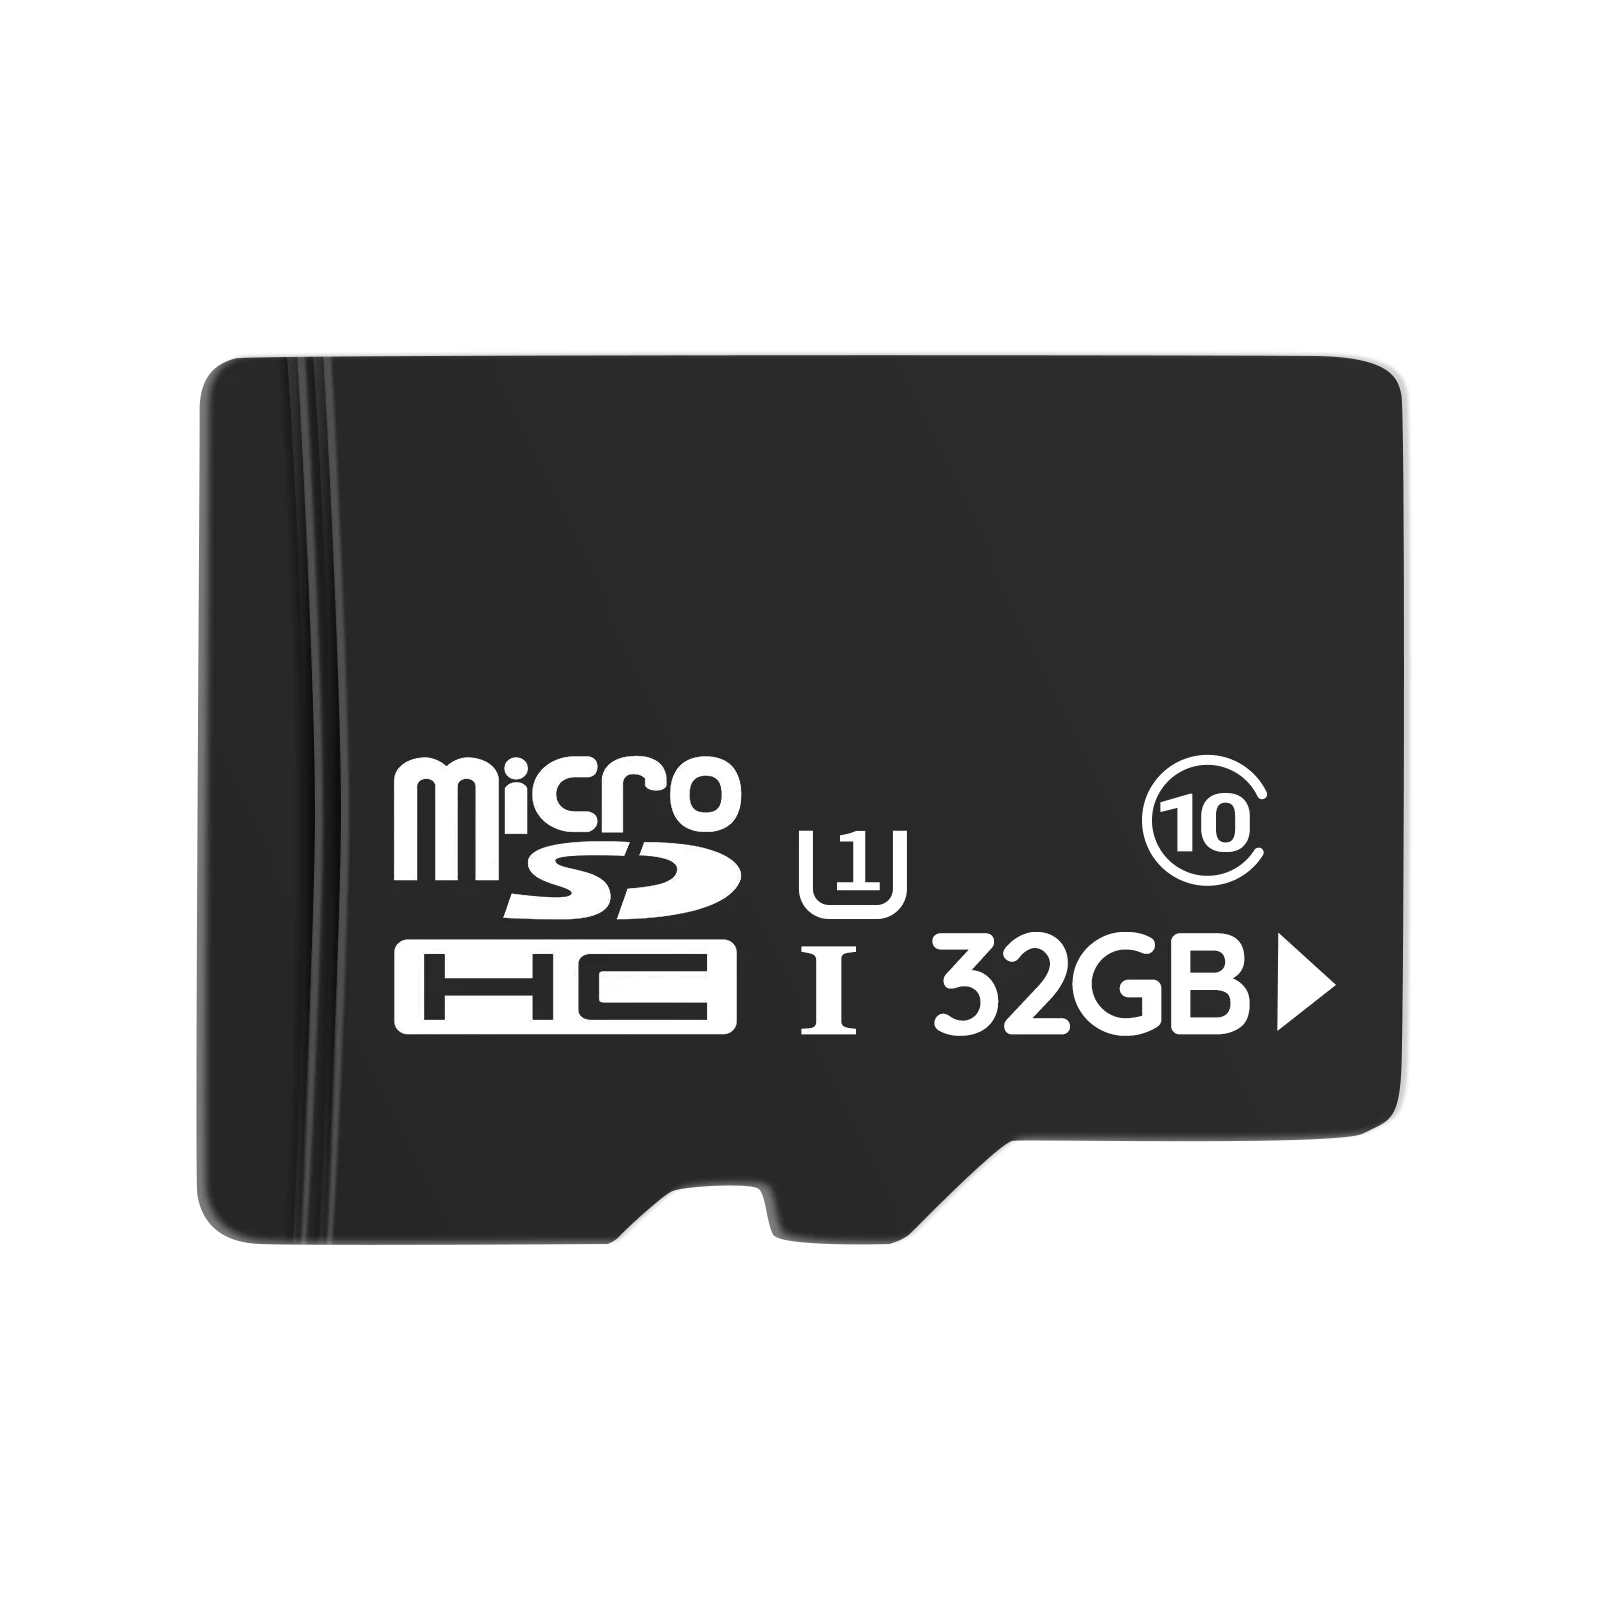 32GB/128GB Micro SD card for Reolink IP camera Argus Series, GO Series, RLC-510A, RLC-520A, RLC-811A, RLC-810A, RLC-1212A, ect